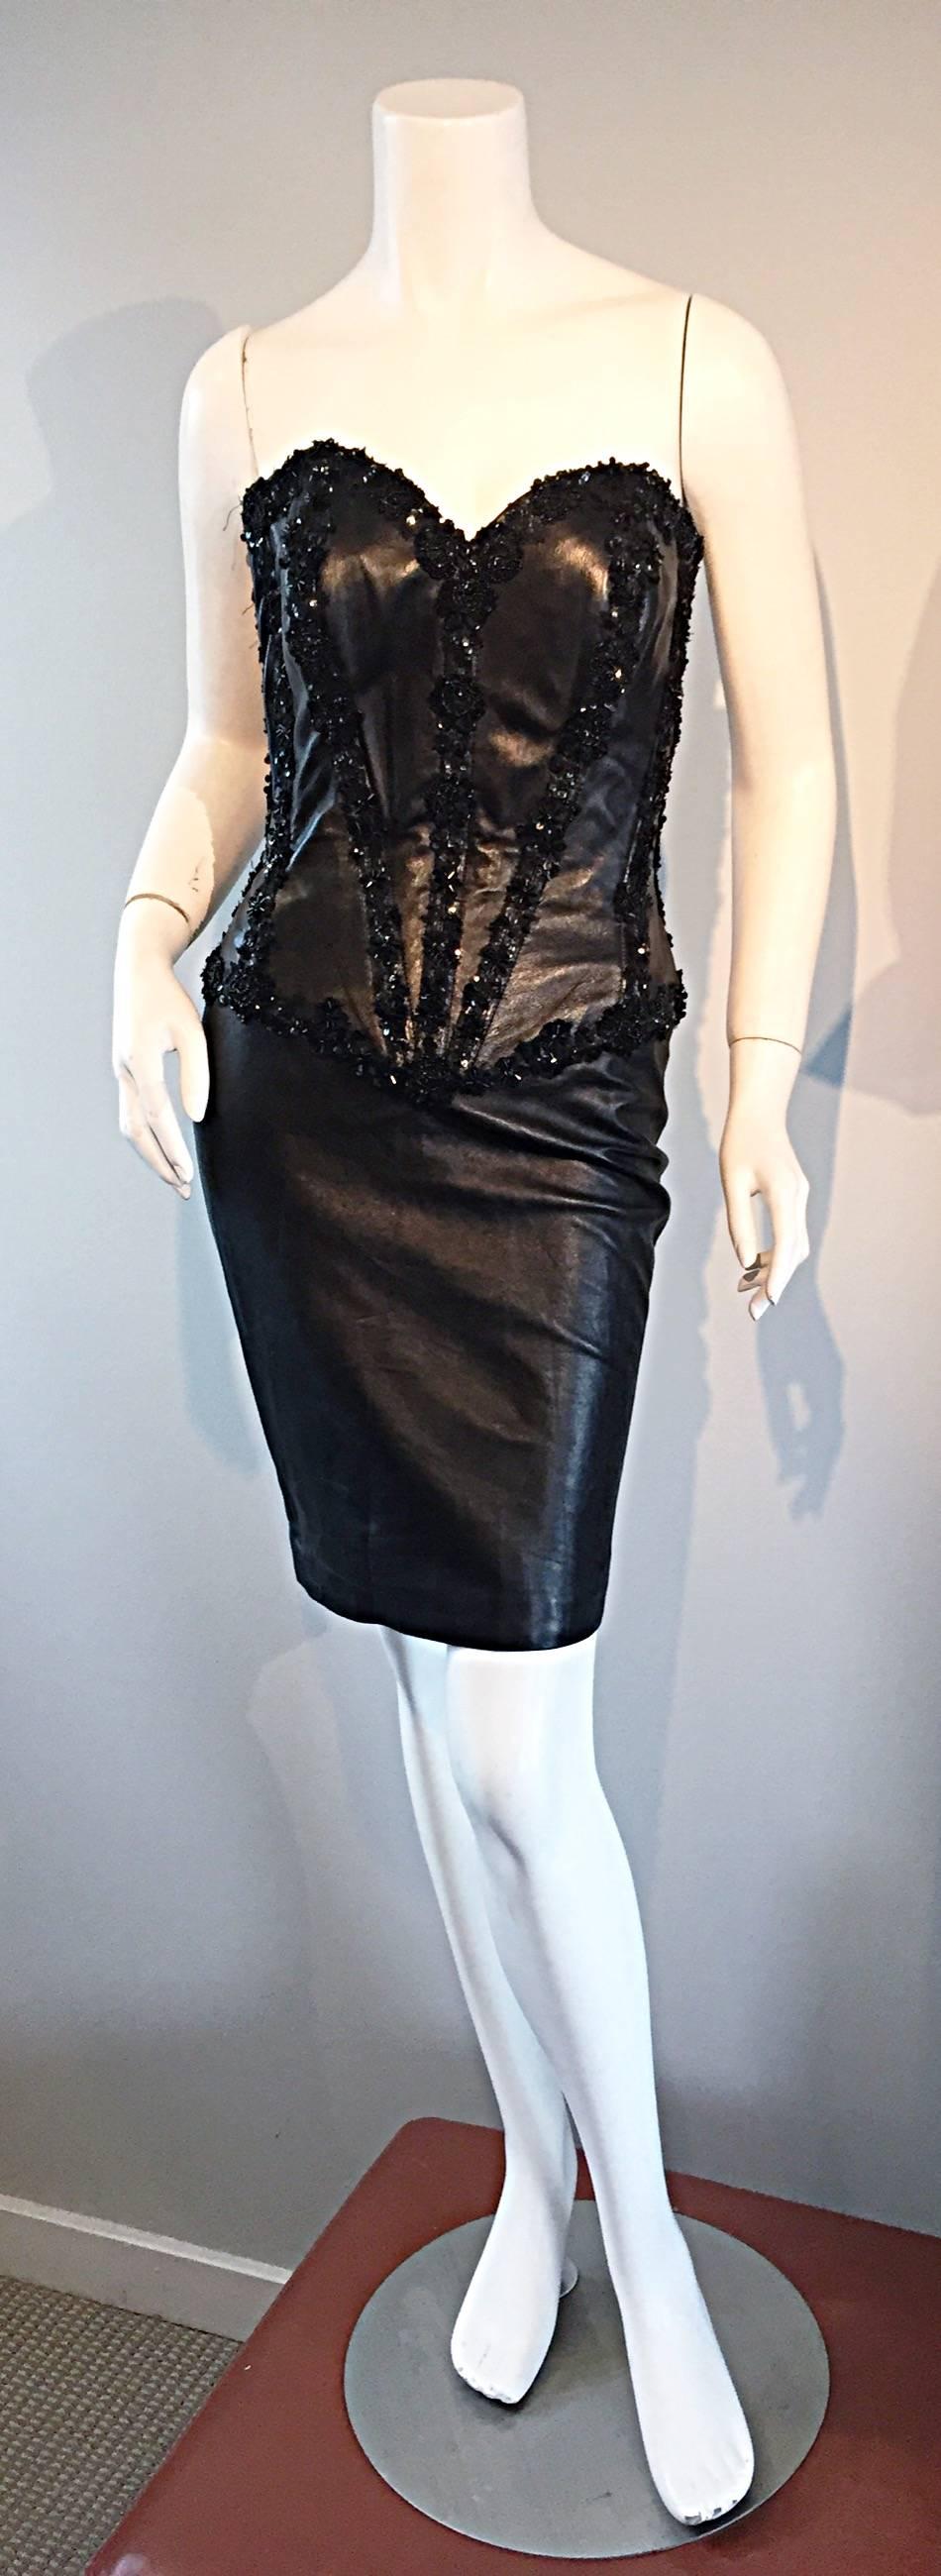 Rare, and super sexy vintage VICKY TIEL COUTURE black leather corseted strapless dress! Vicky Tiel was the premiere costume designer for the 1990s movie, 